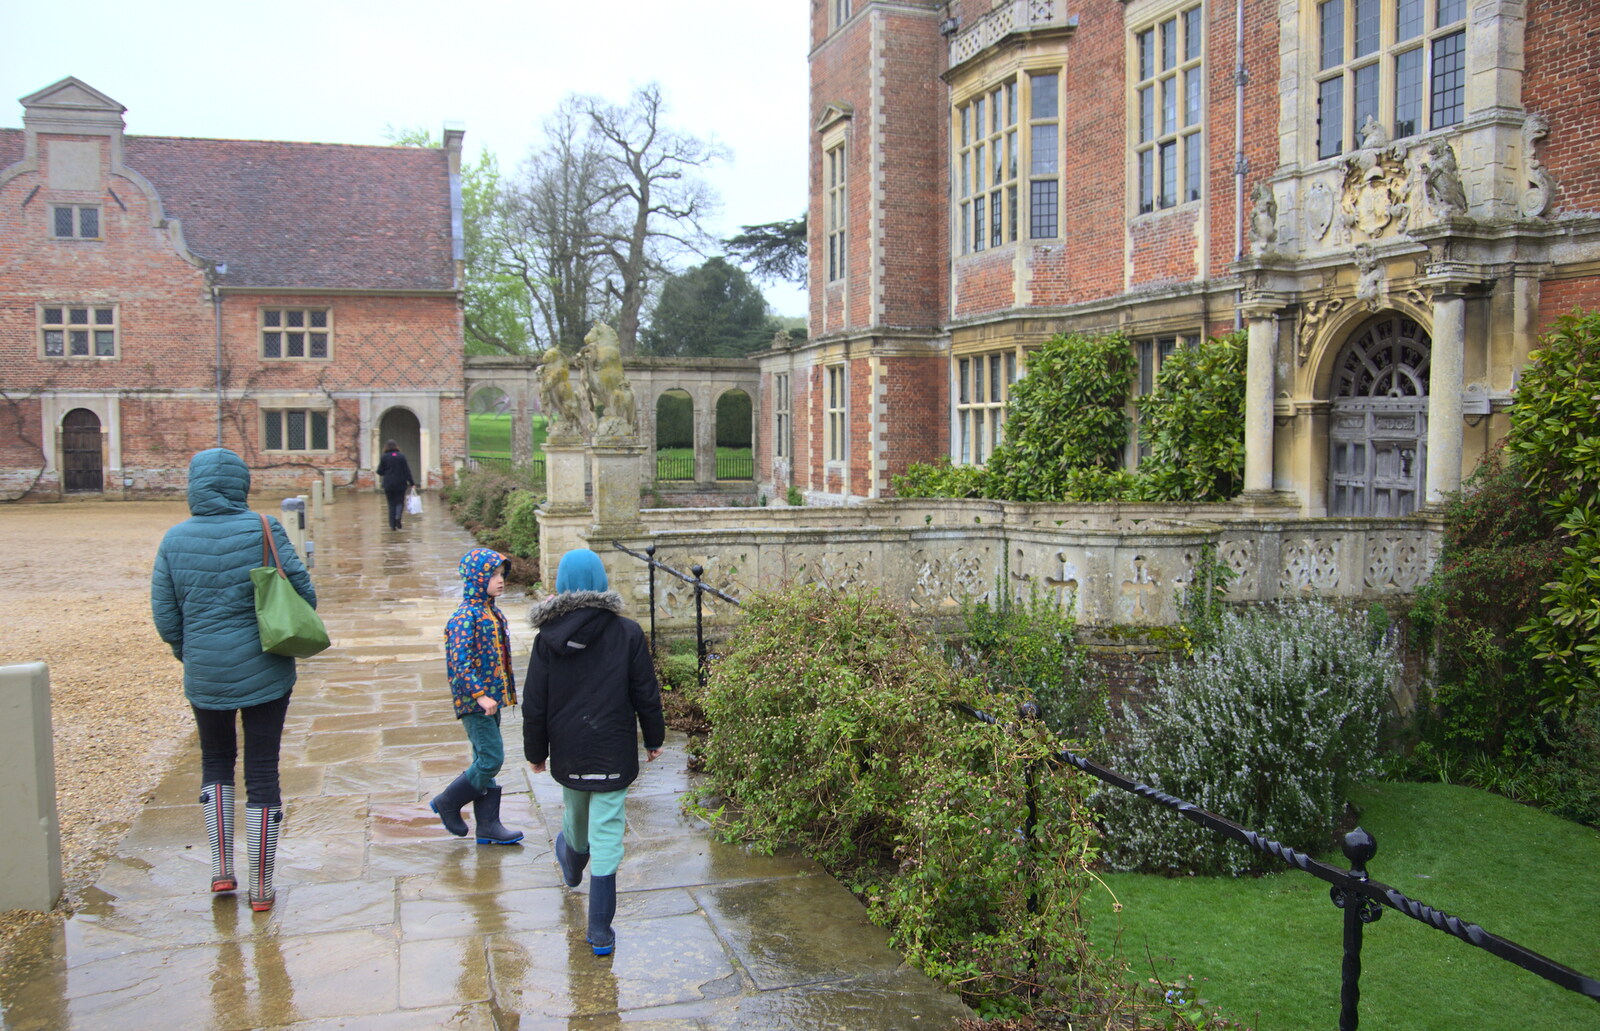 Walking around in the rain from A Trip to Blickling Hall, Aylsham, Norfolk - 29th April 2018